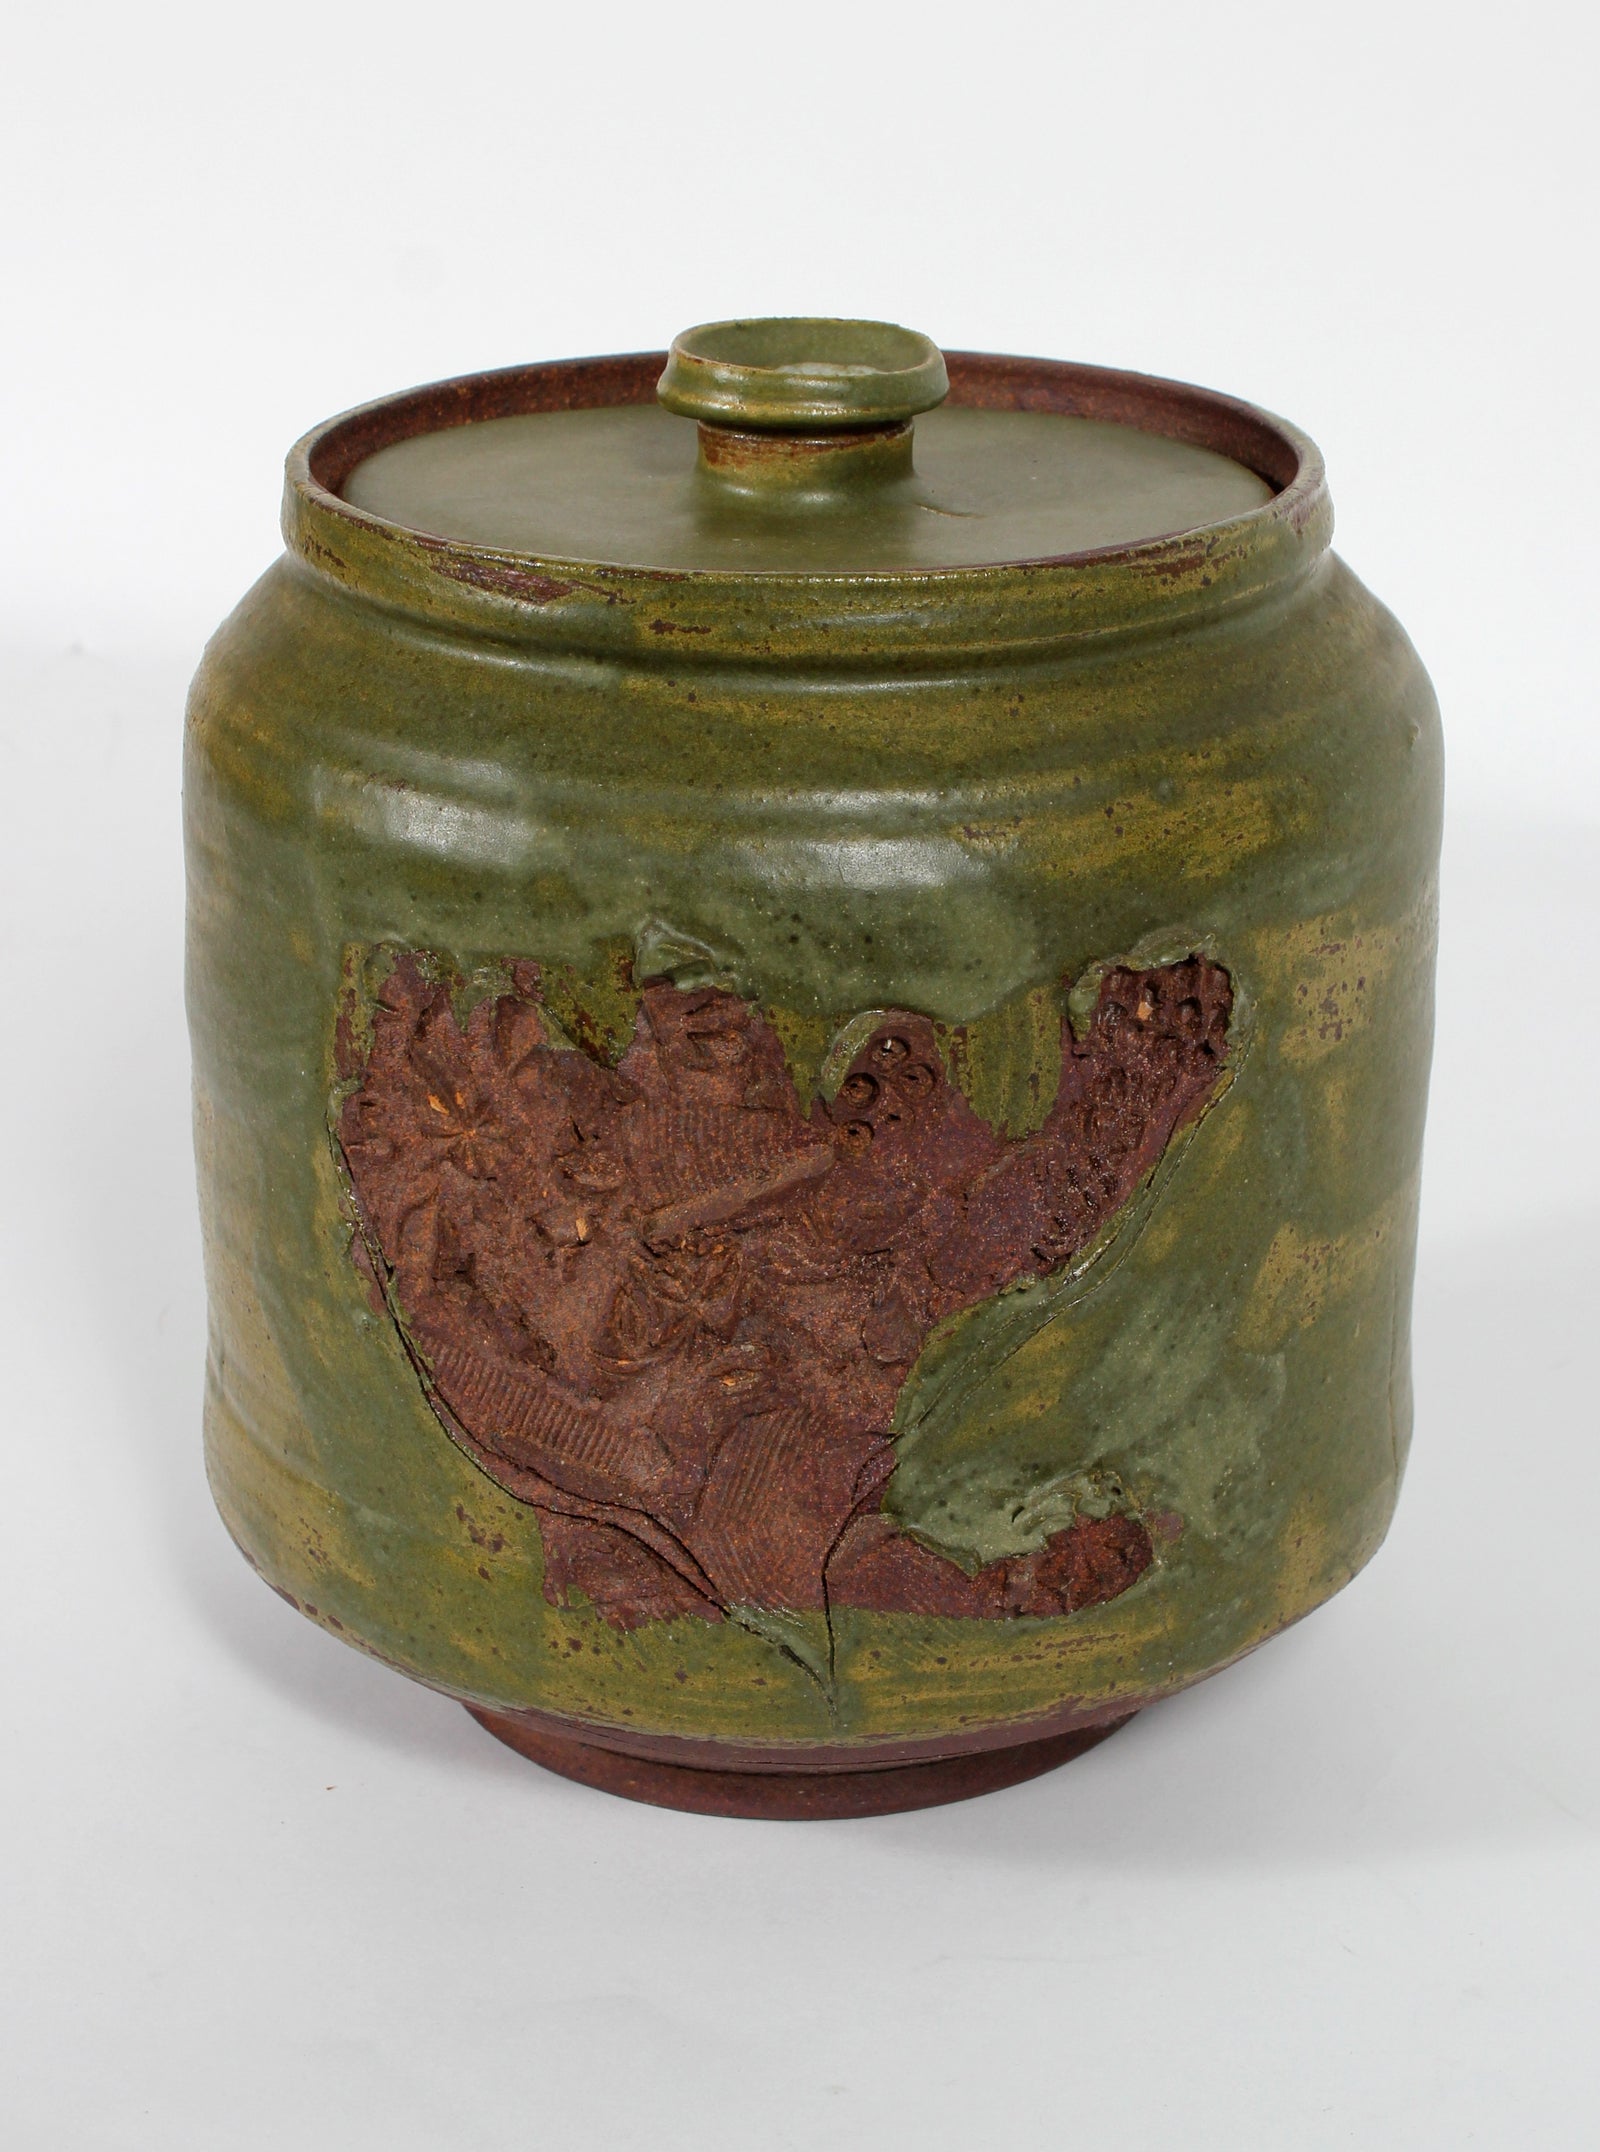 Green & Brown Ceramic Container<br><br>#47104